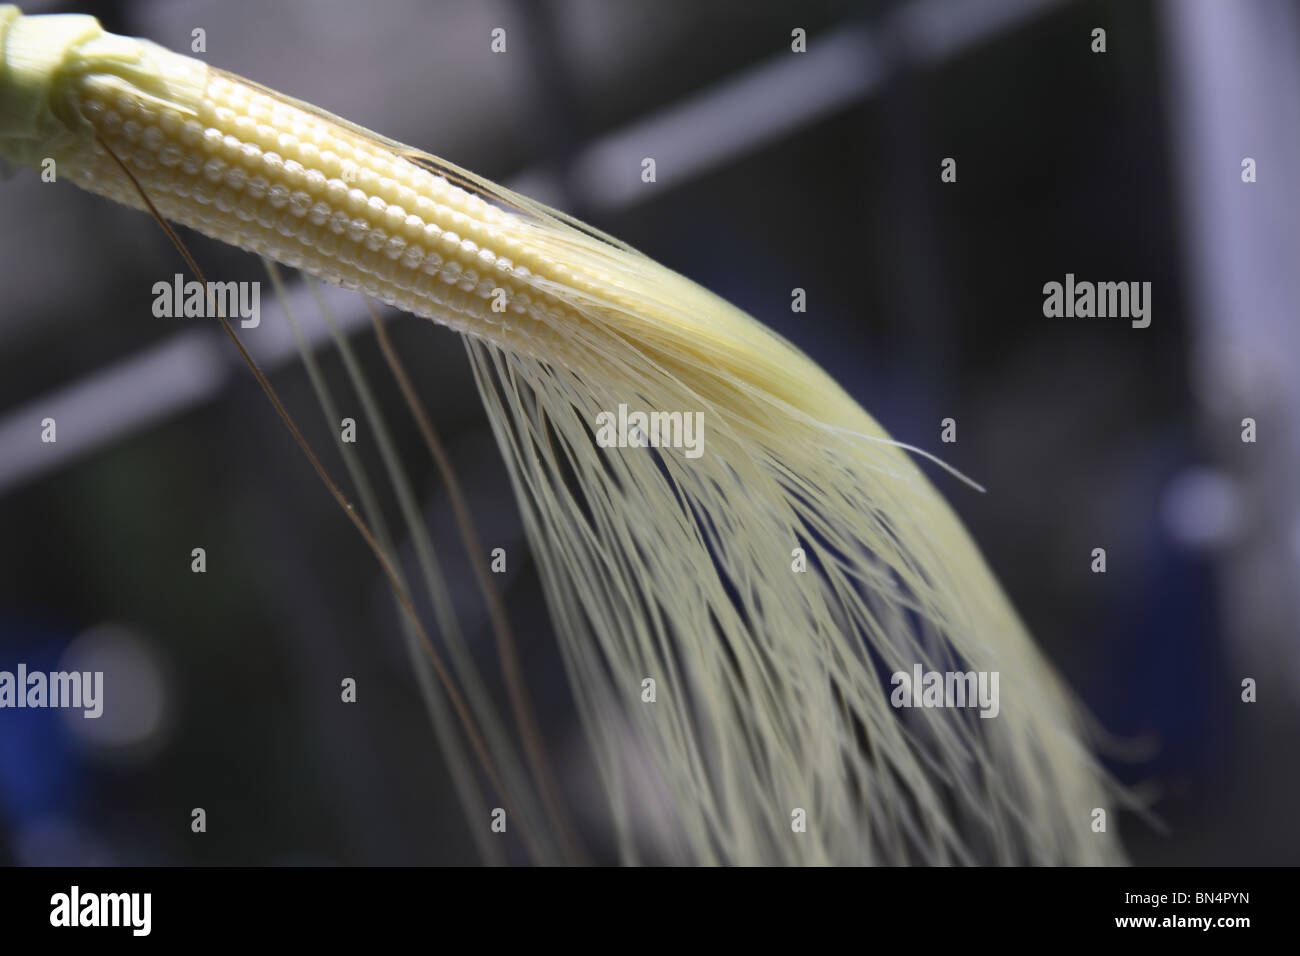 Crop ; Baby Corn ; Maize ; Zea mays ; Used in Salads or vegetables ; India Stock Photo